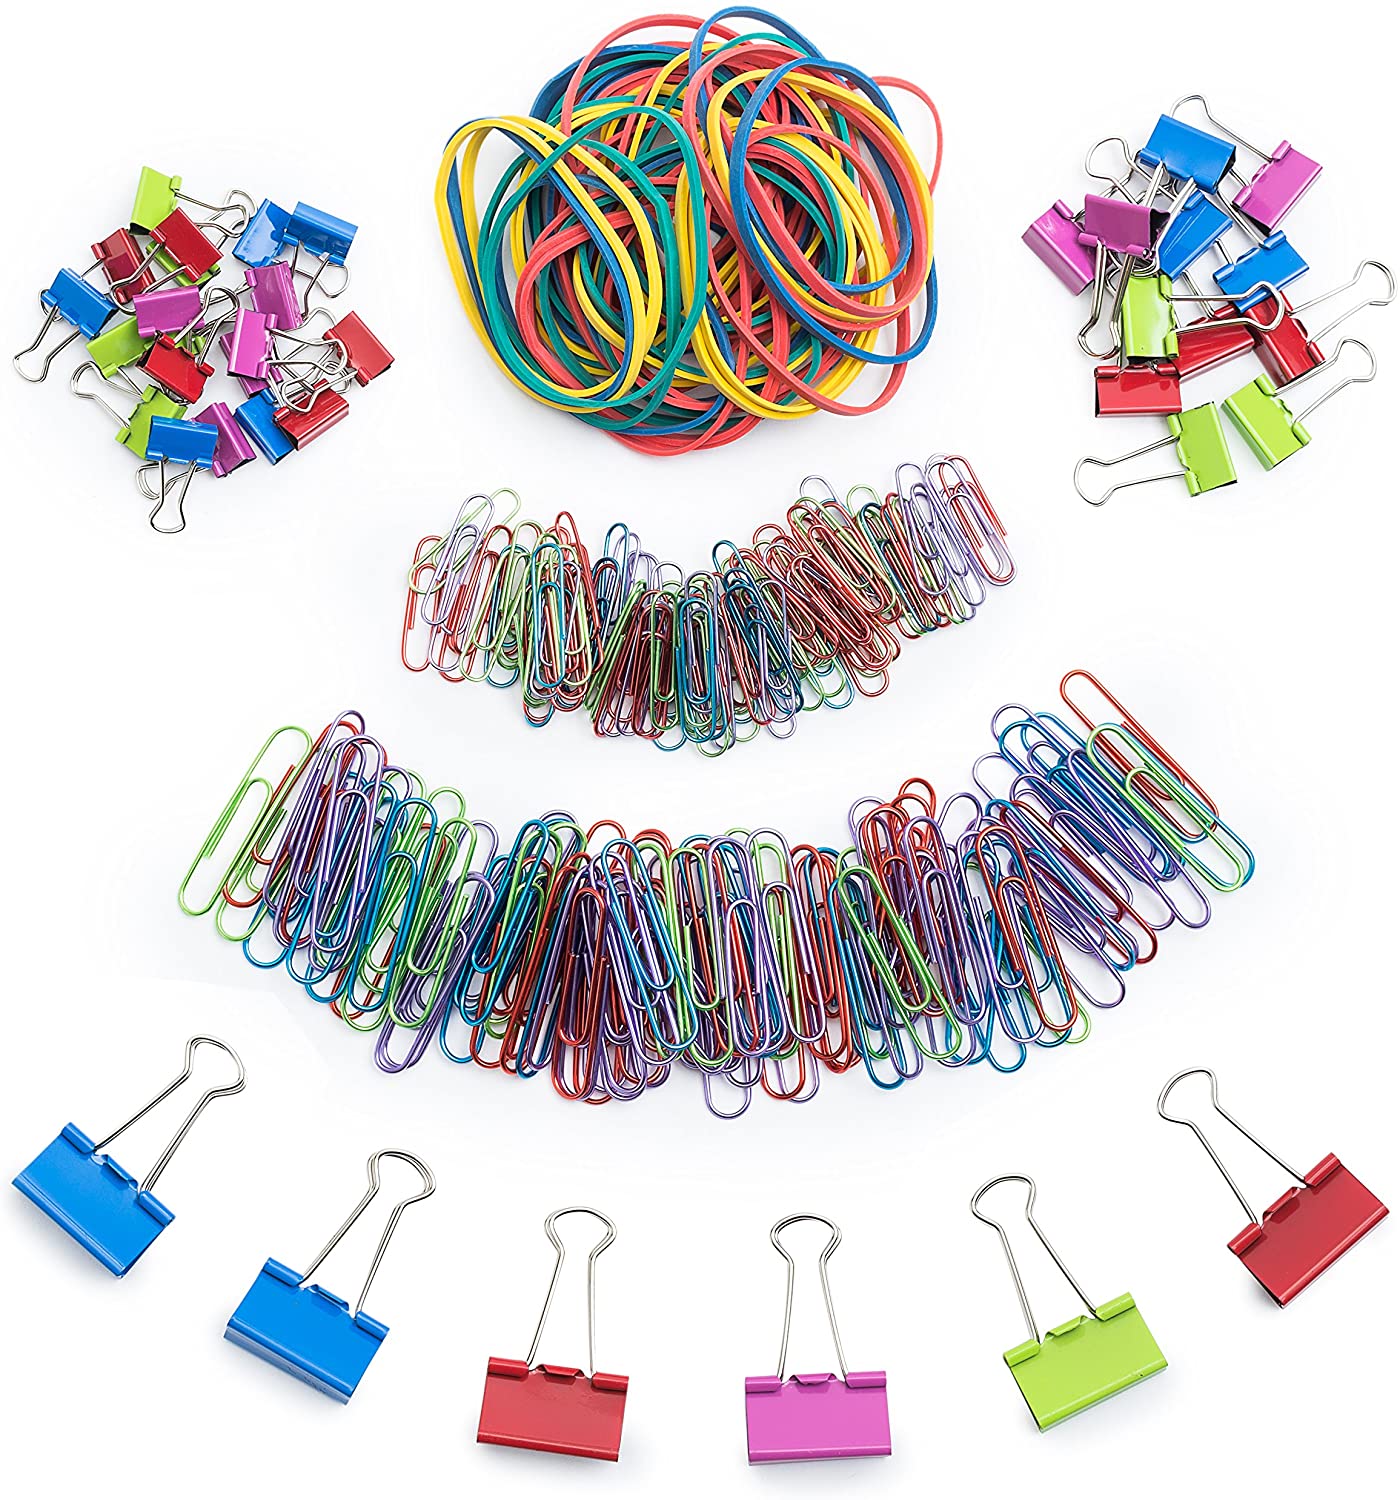 Assorted Colored Clips and Rubber Bands - The CEO Creative